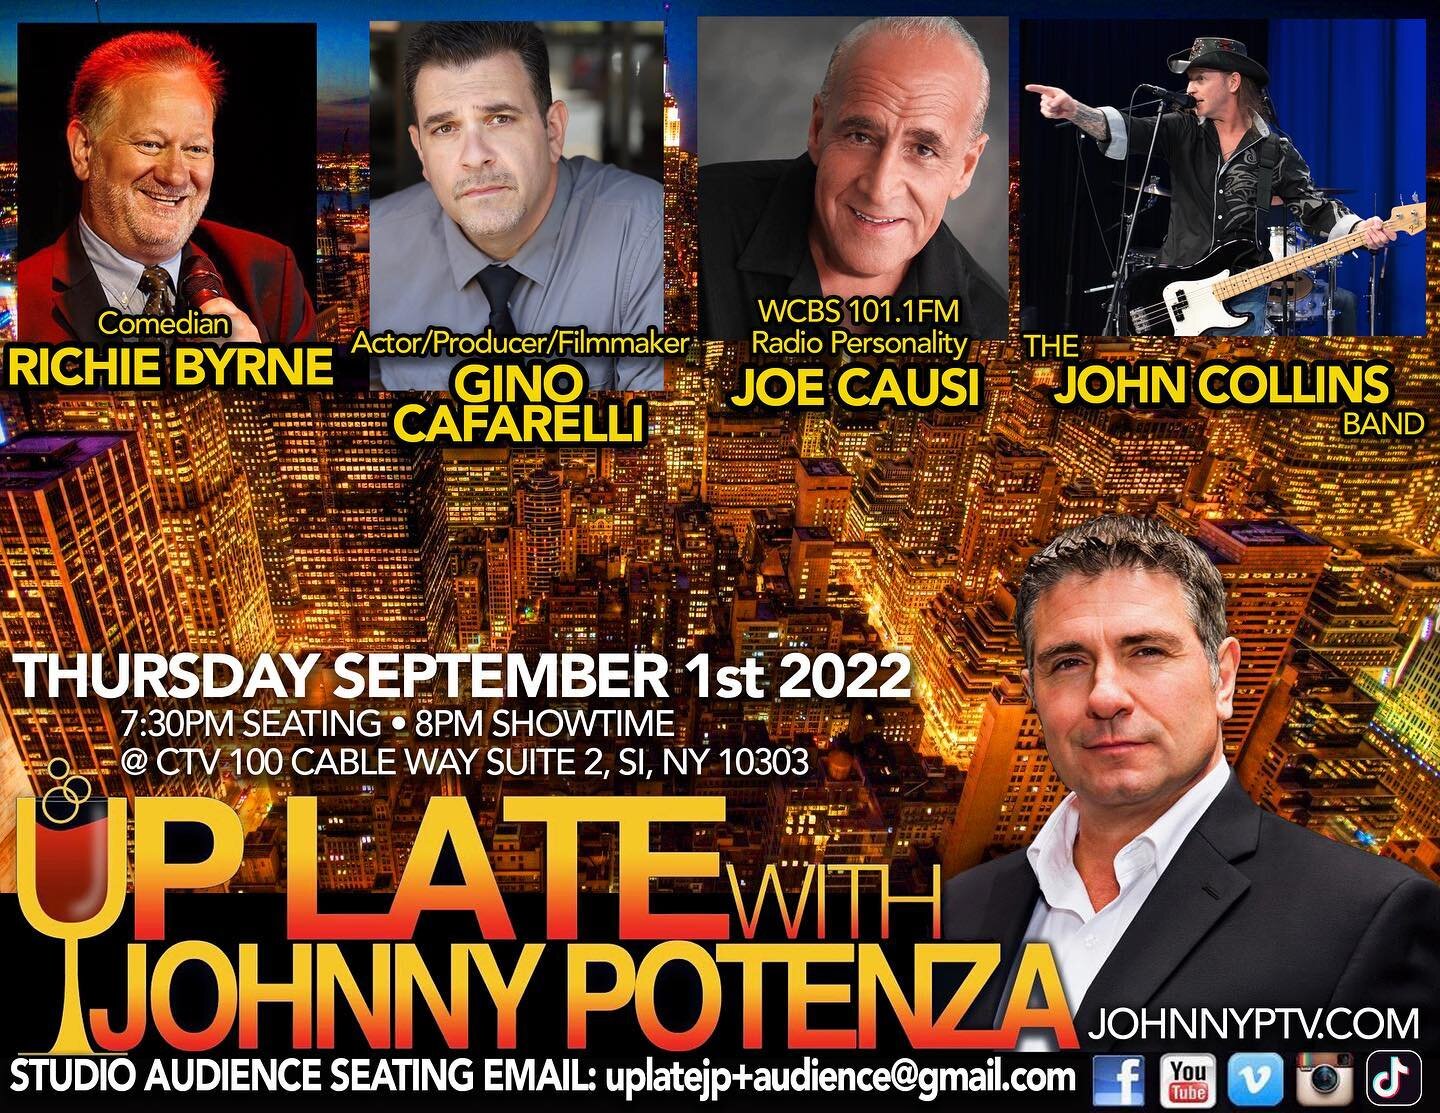 Next taping Sept.1, 2022 featuring comediain Richie Byrne, actor, producer Gino Cafarelli, the John Collins band &amp; our very special guest from WCBS 101.1 FM Brooklyn's own Joe Causi. To be part of our free studio audience email: uplate+audience@g